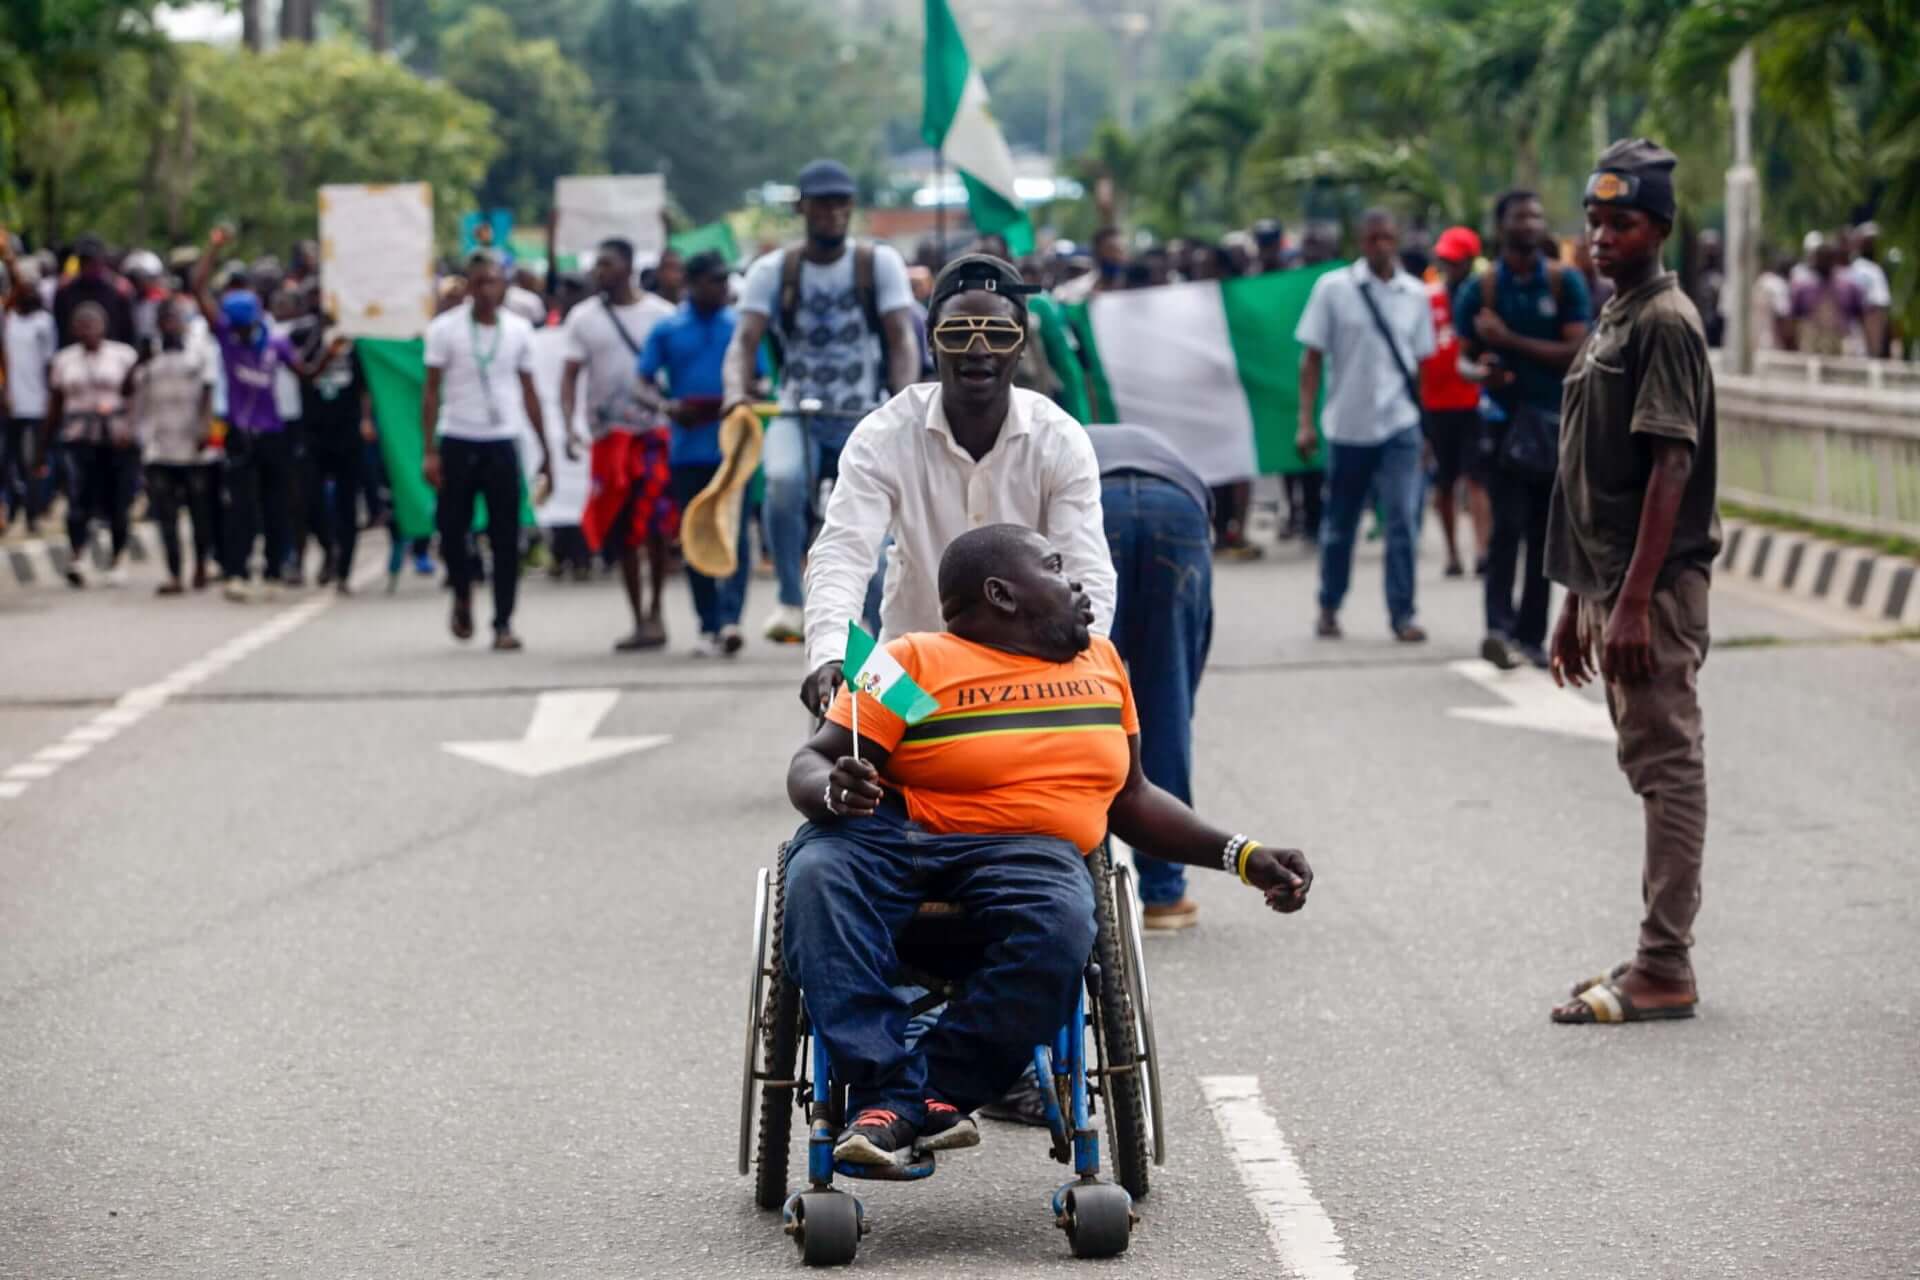 Nigerian demonstrators march behind a man in a wheelchair being pushed by his caregiver.